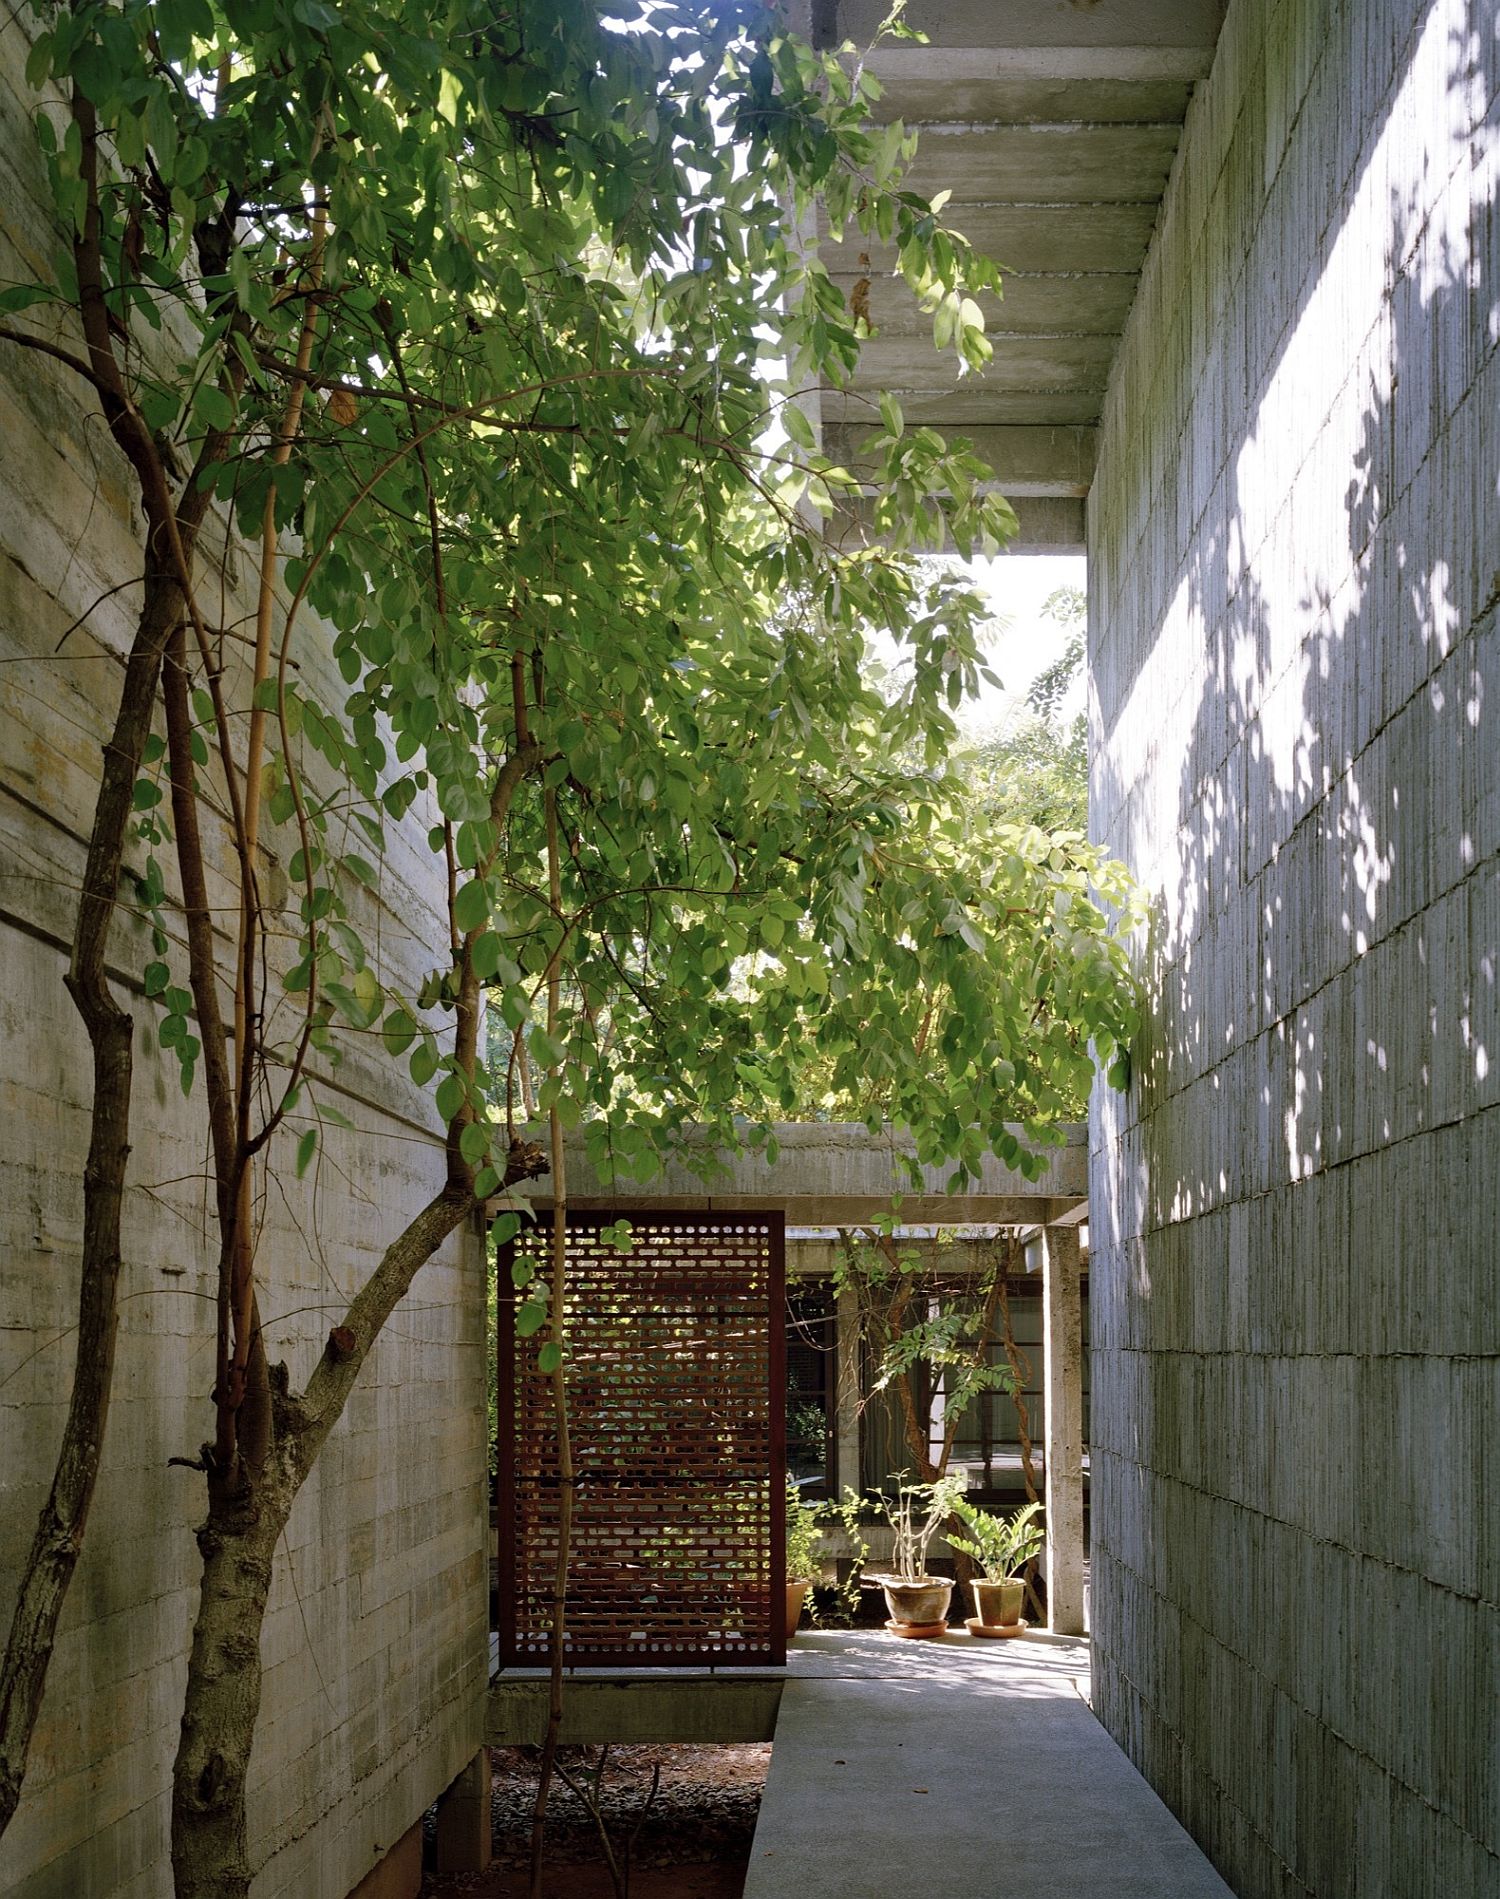 Entrance and a series of courtyards filled with greenery add to the appeal of the house